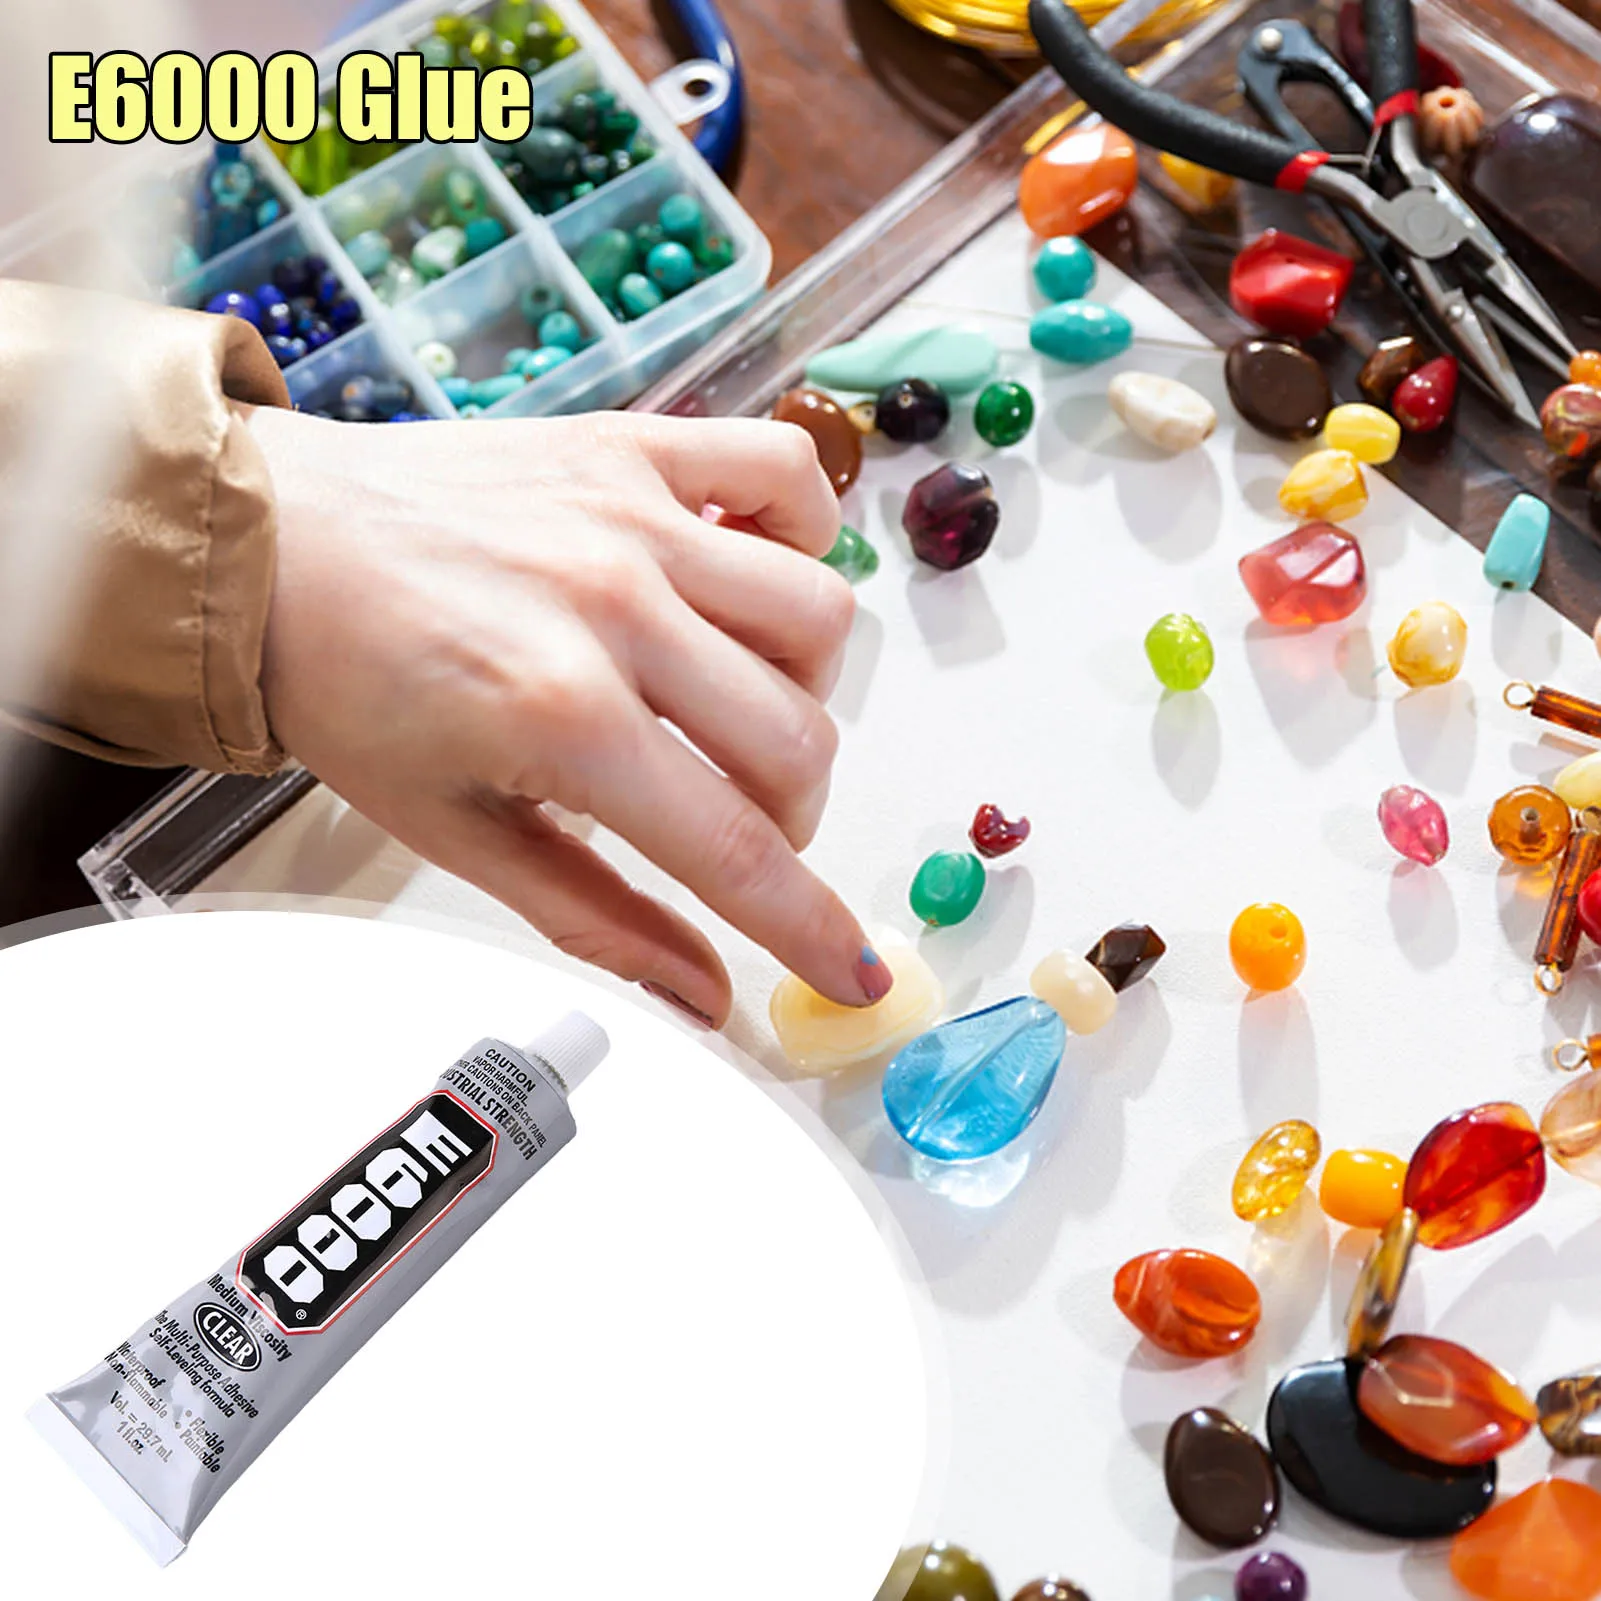 29 Ml E- 6000 Glue Adhesive Epoxy Resin Repair Cell Phone Touch Screen  Liquid Glue Jewelry Craft Adhesive Glue - Fillers, Adhesives & Sealants -  AliExpress